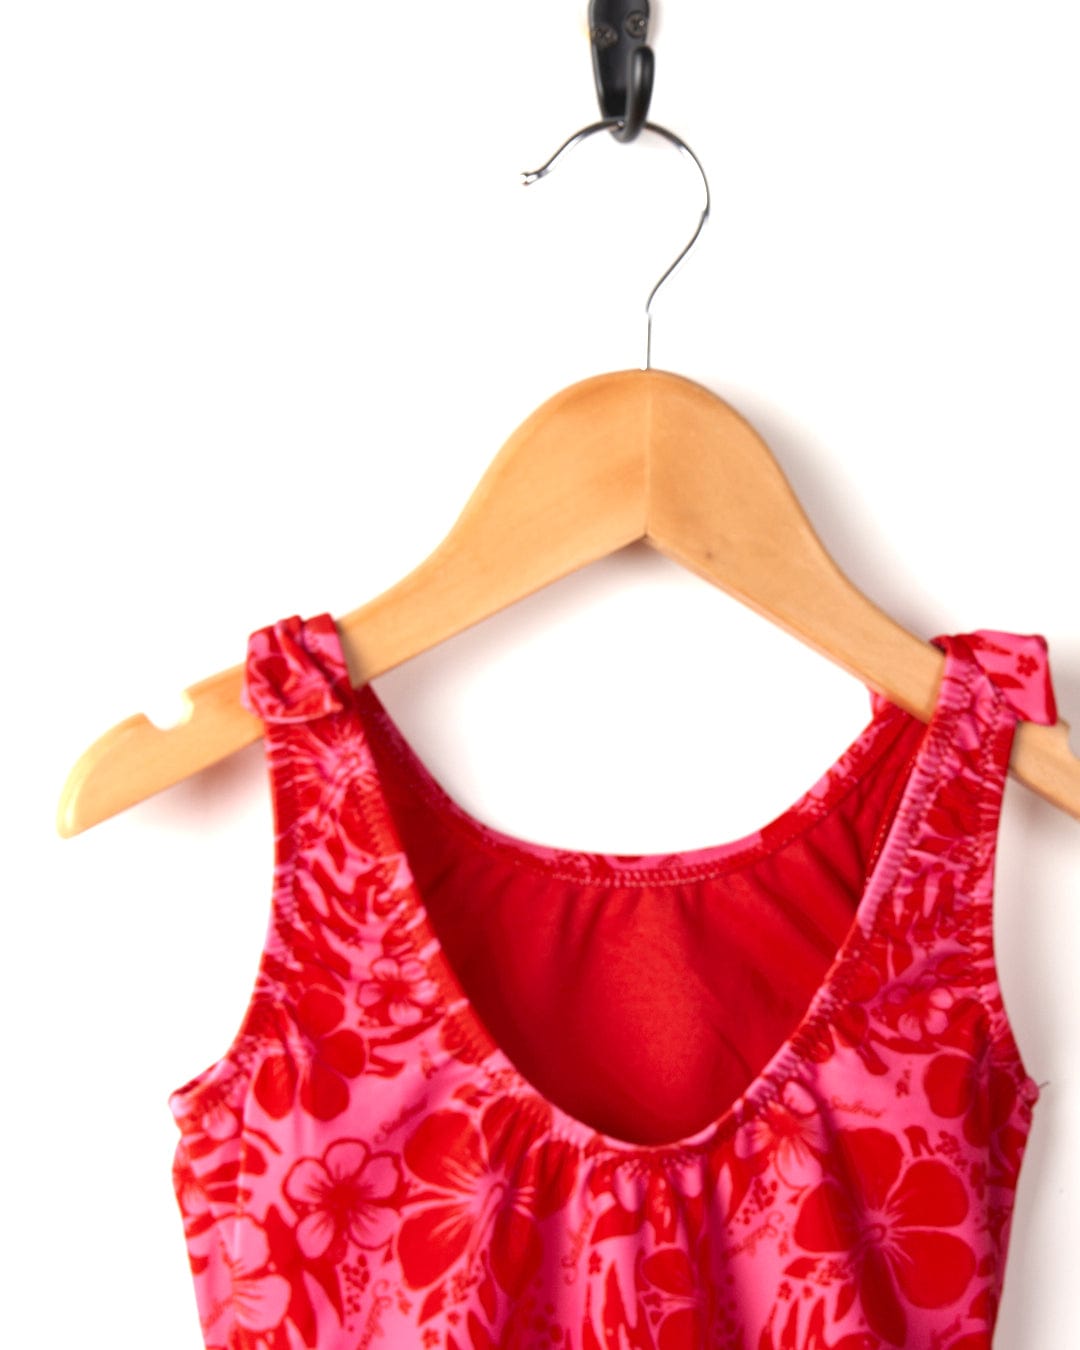 Red floral Saltrock Sunny Hibiscus dress hanging on a wooden hanger against a white background.